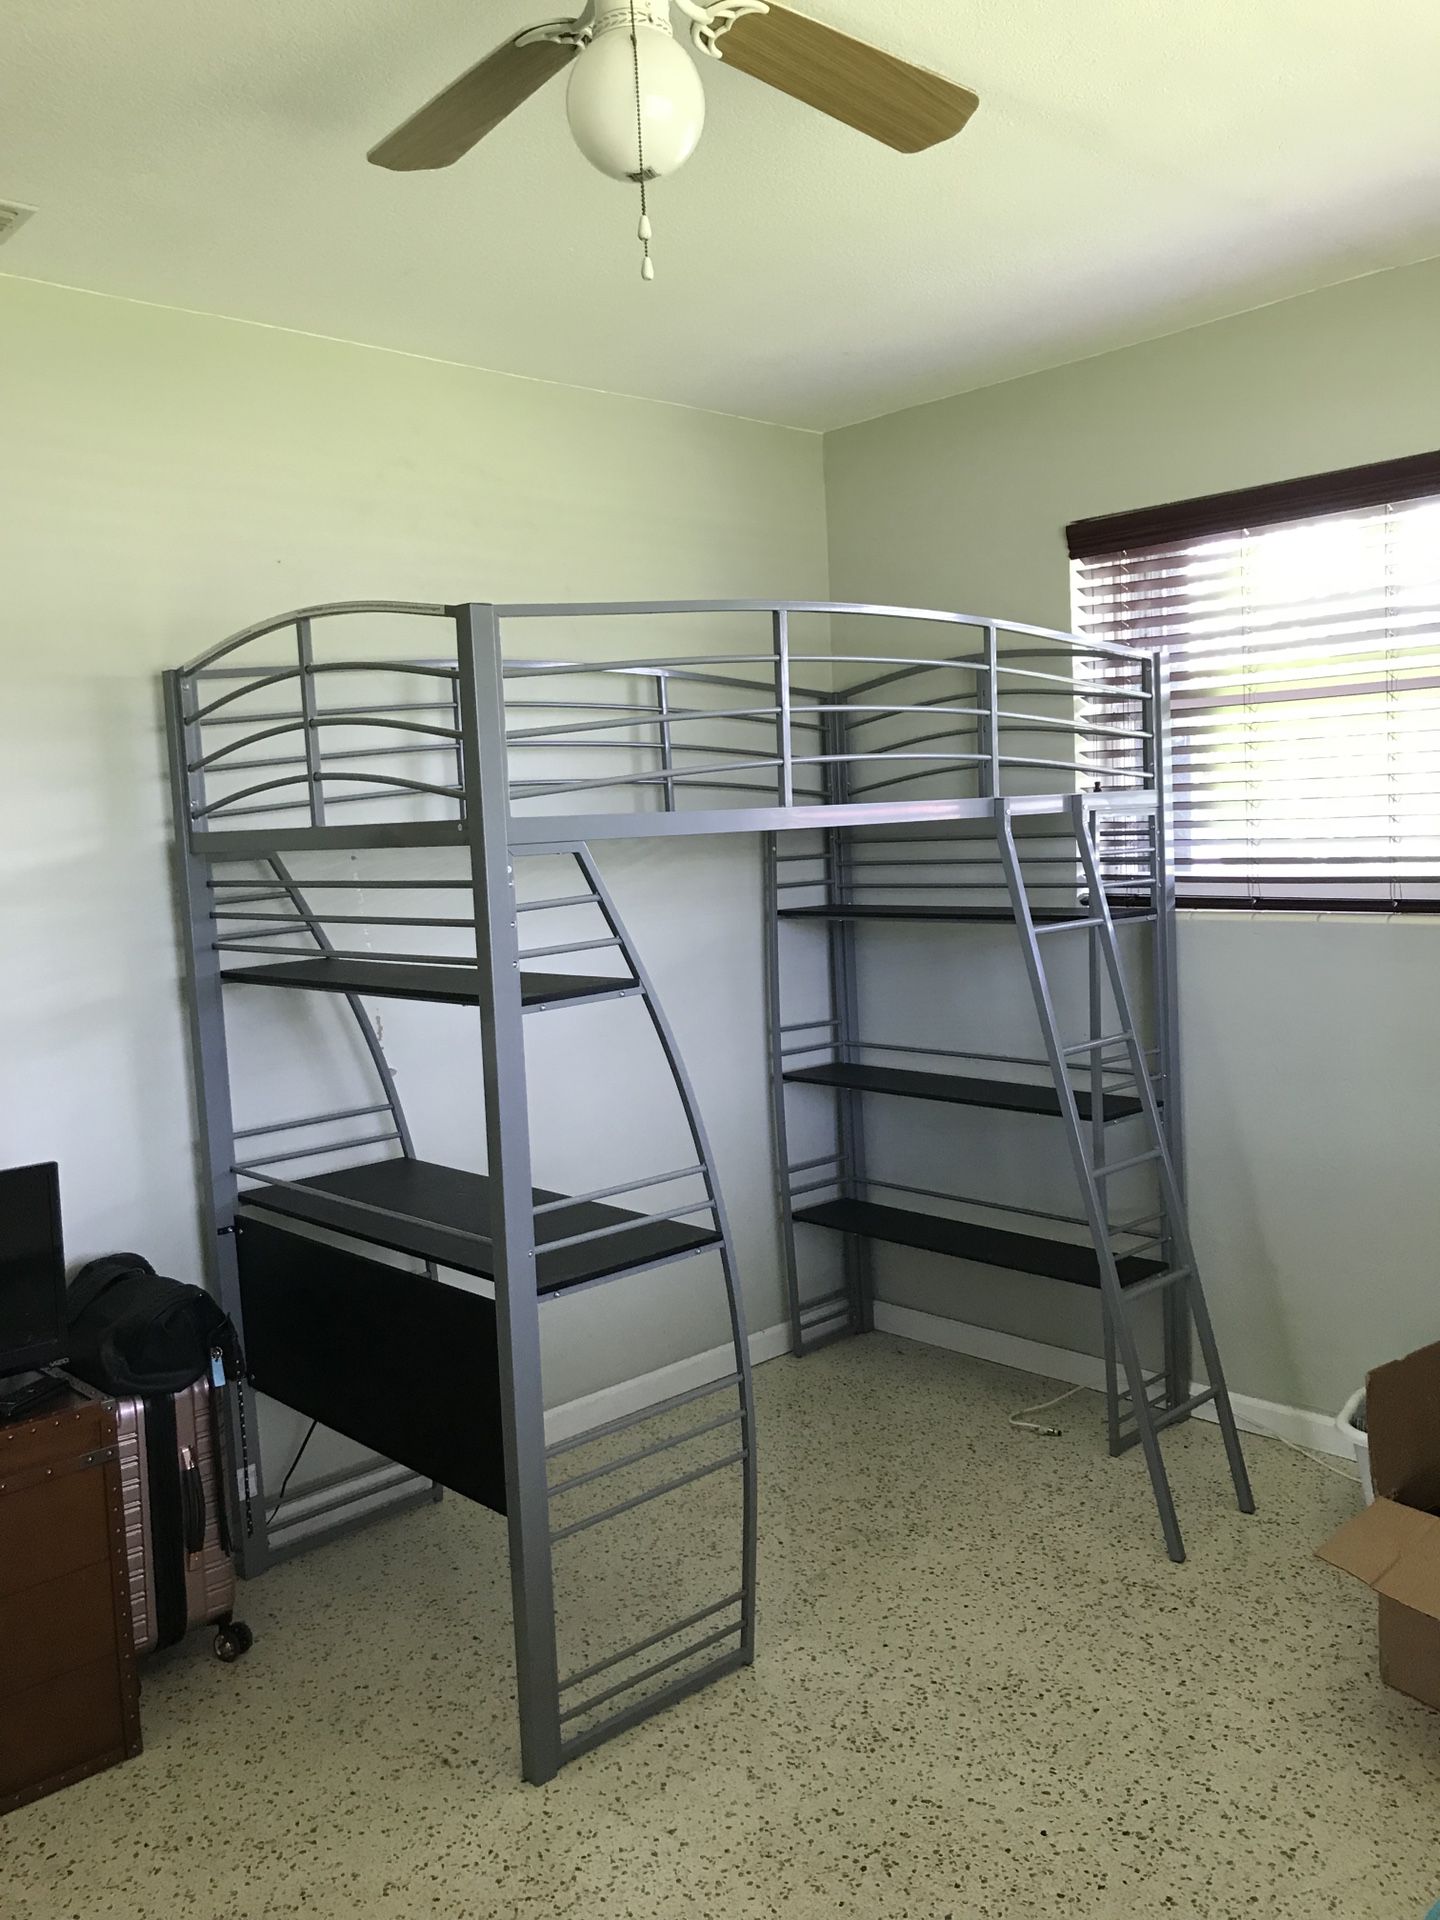 Bunk bed almost new hardly used